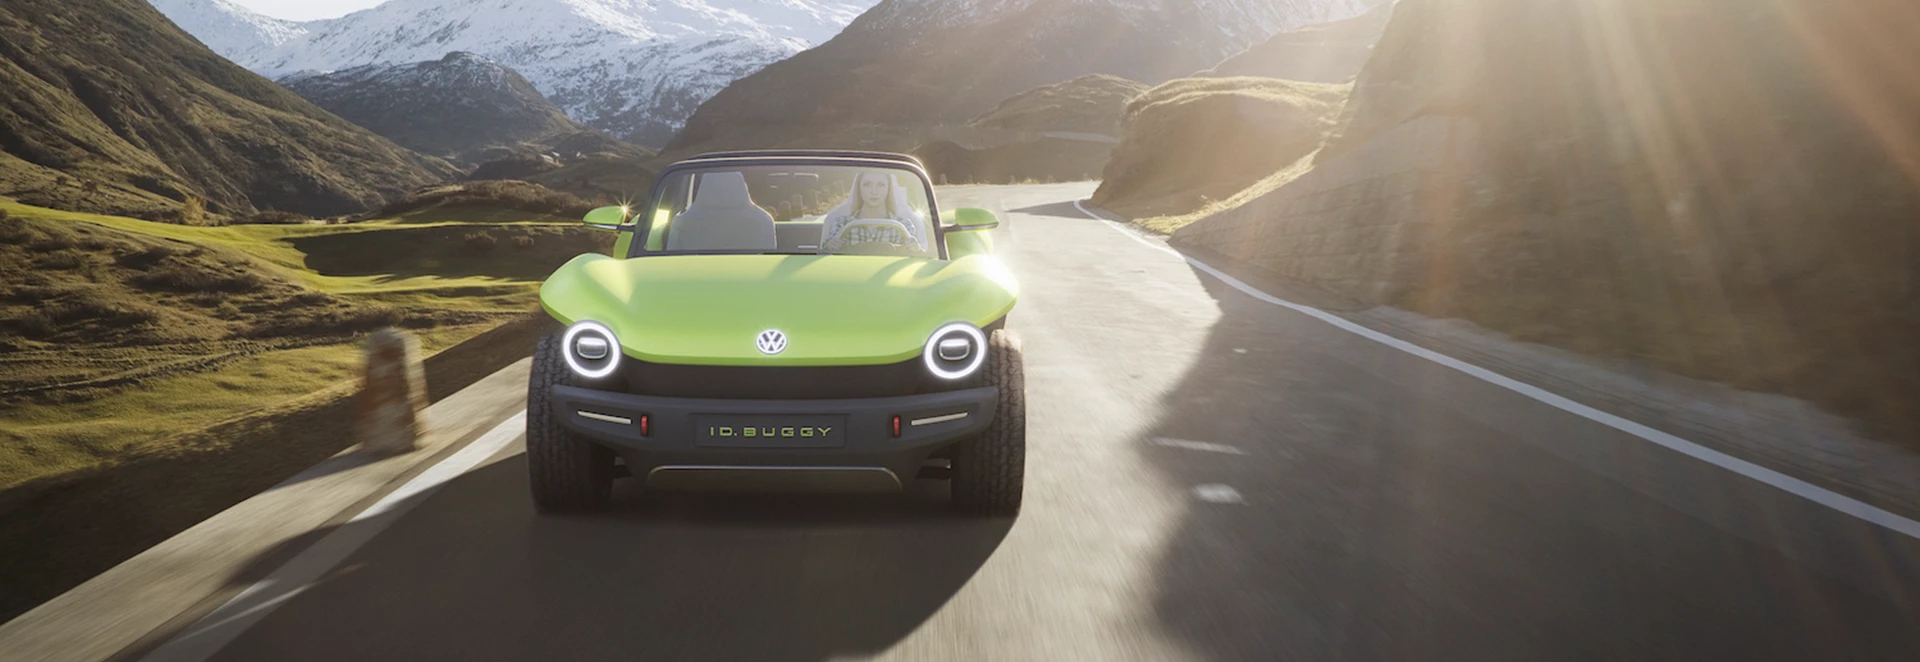 Volkswagen reveals ID. Buggy all-electric concept